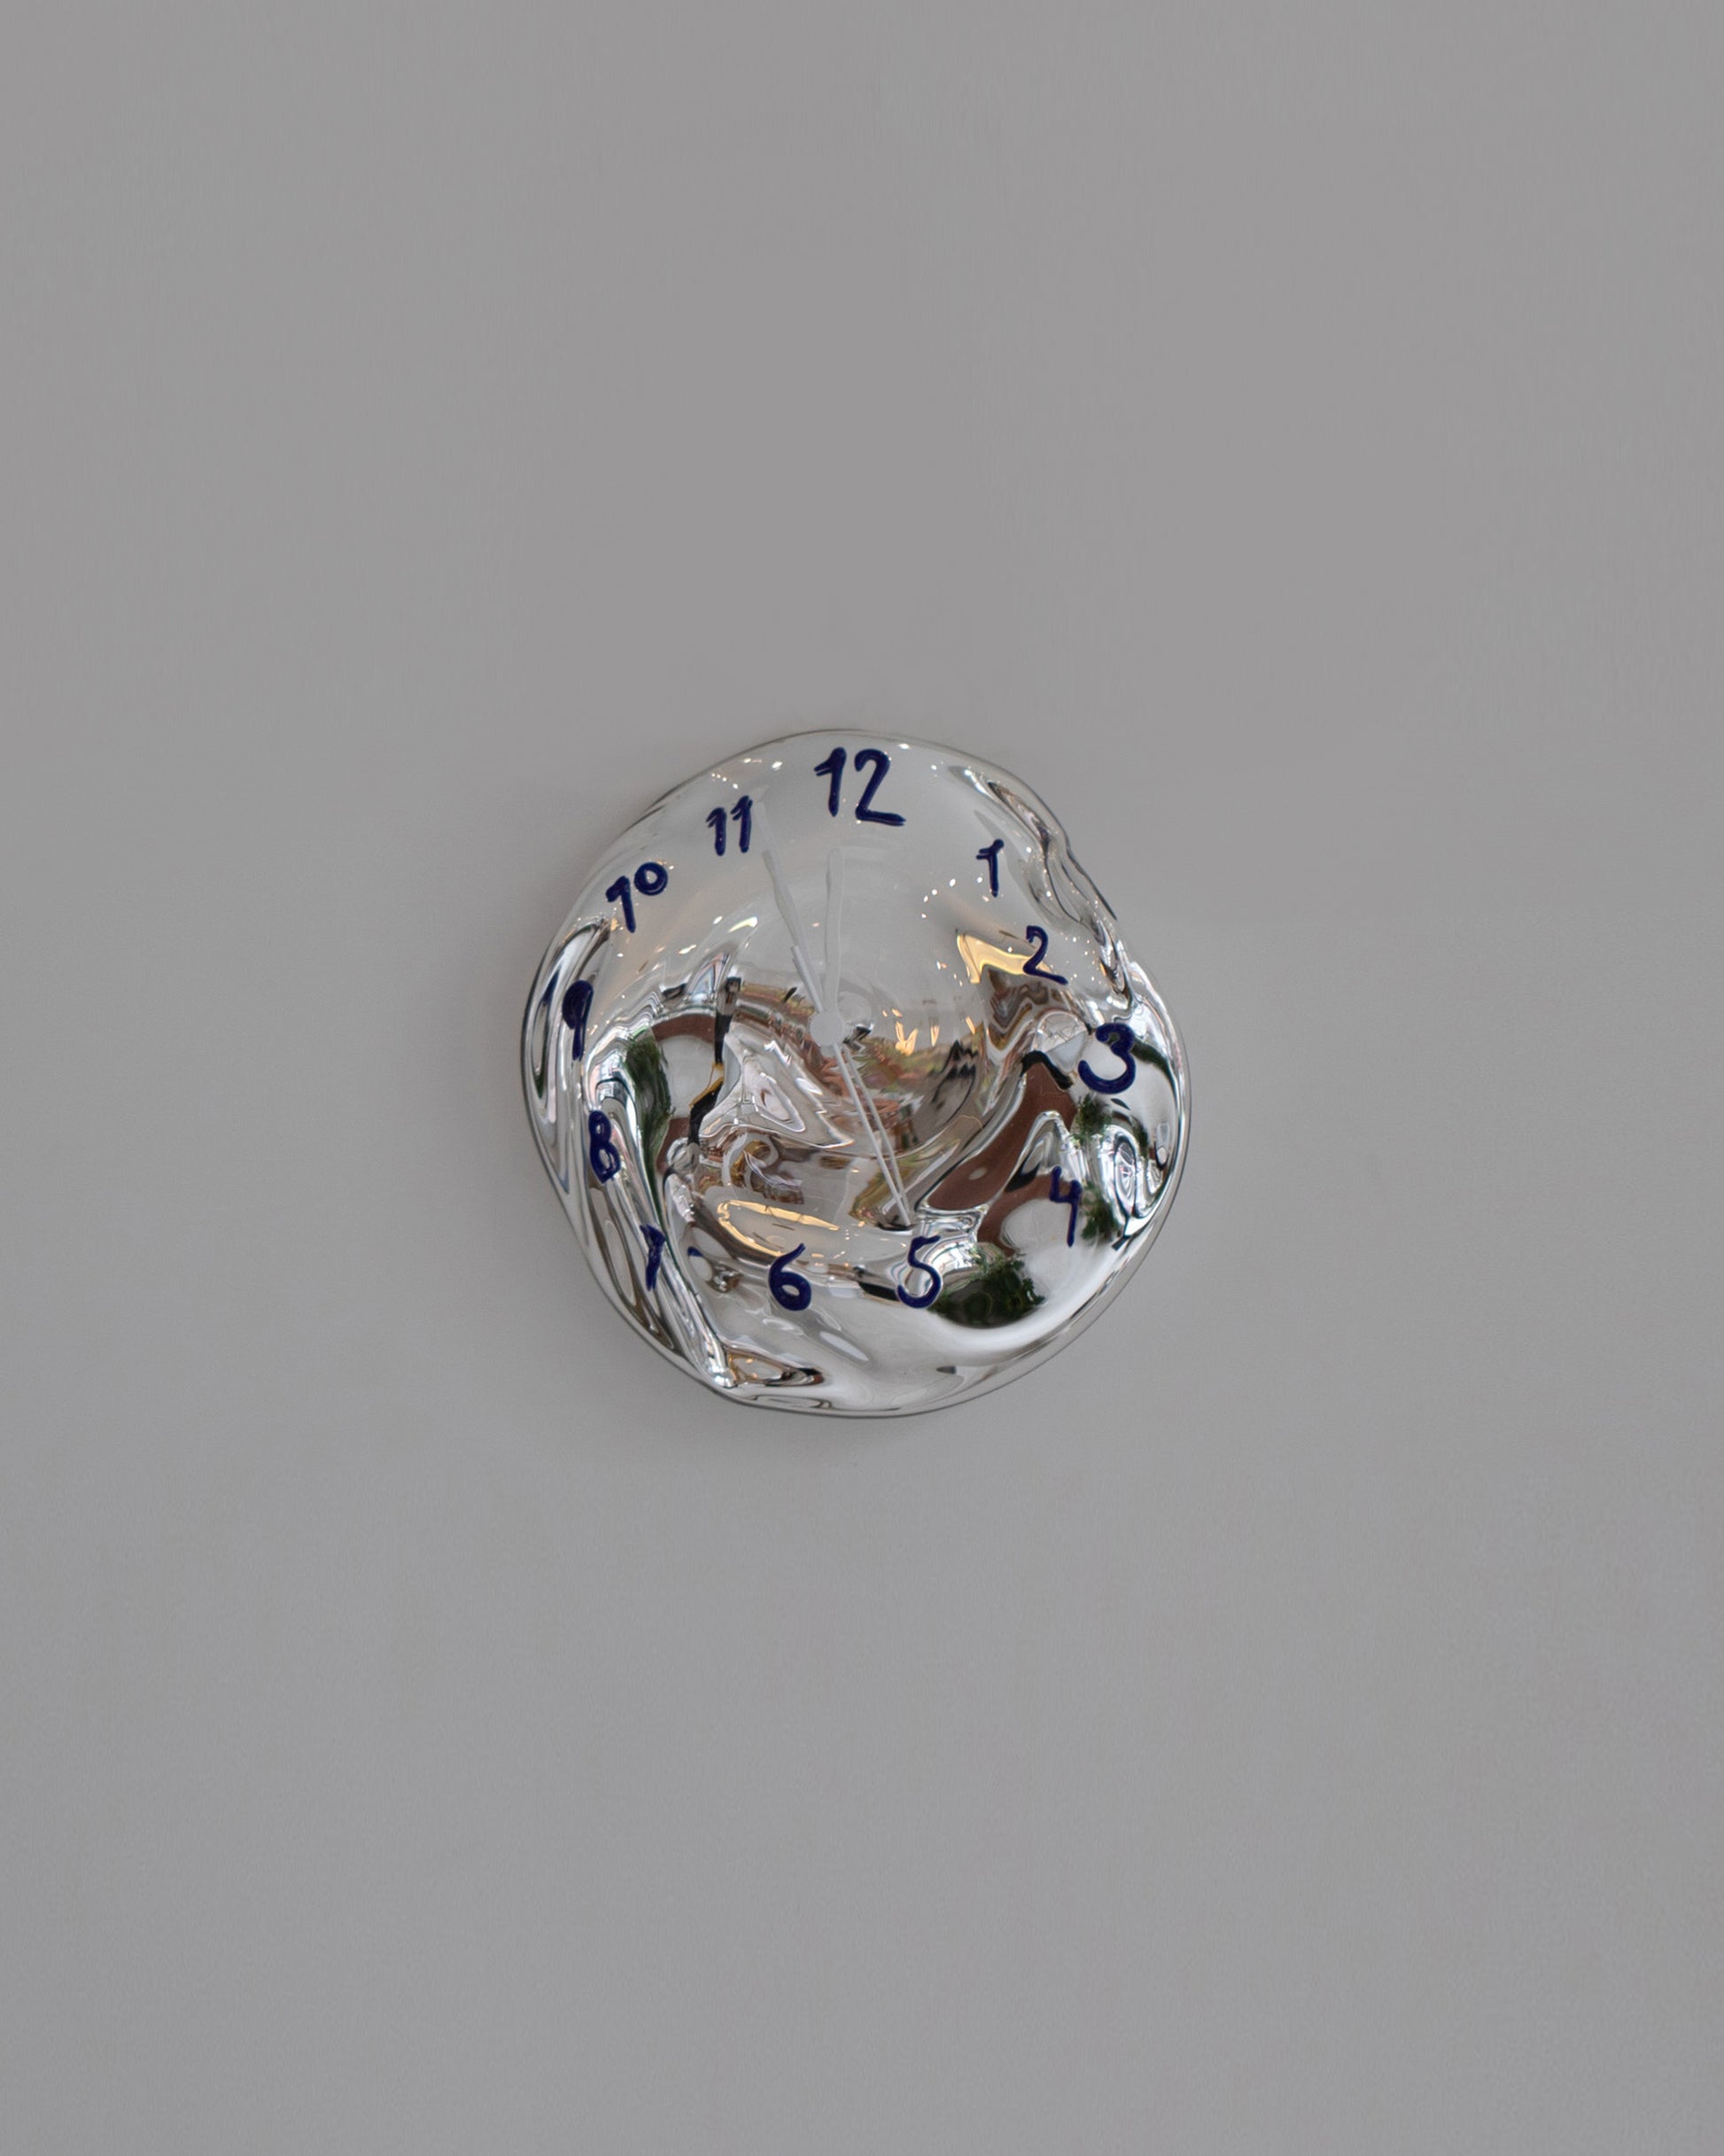 Silje Lindrup White Hands Two Blue Glass Wall Clock on light color background.